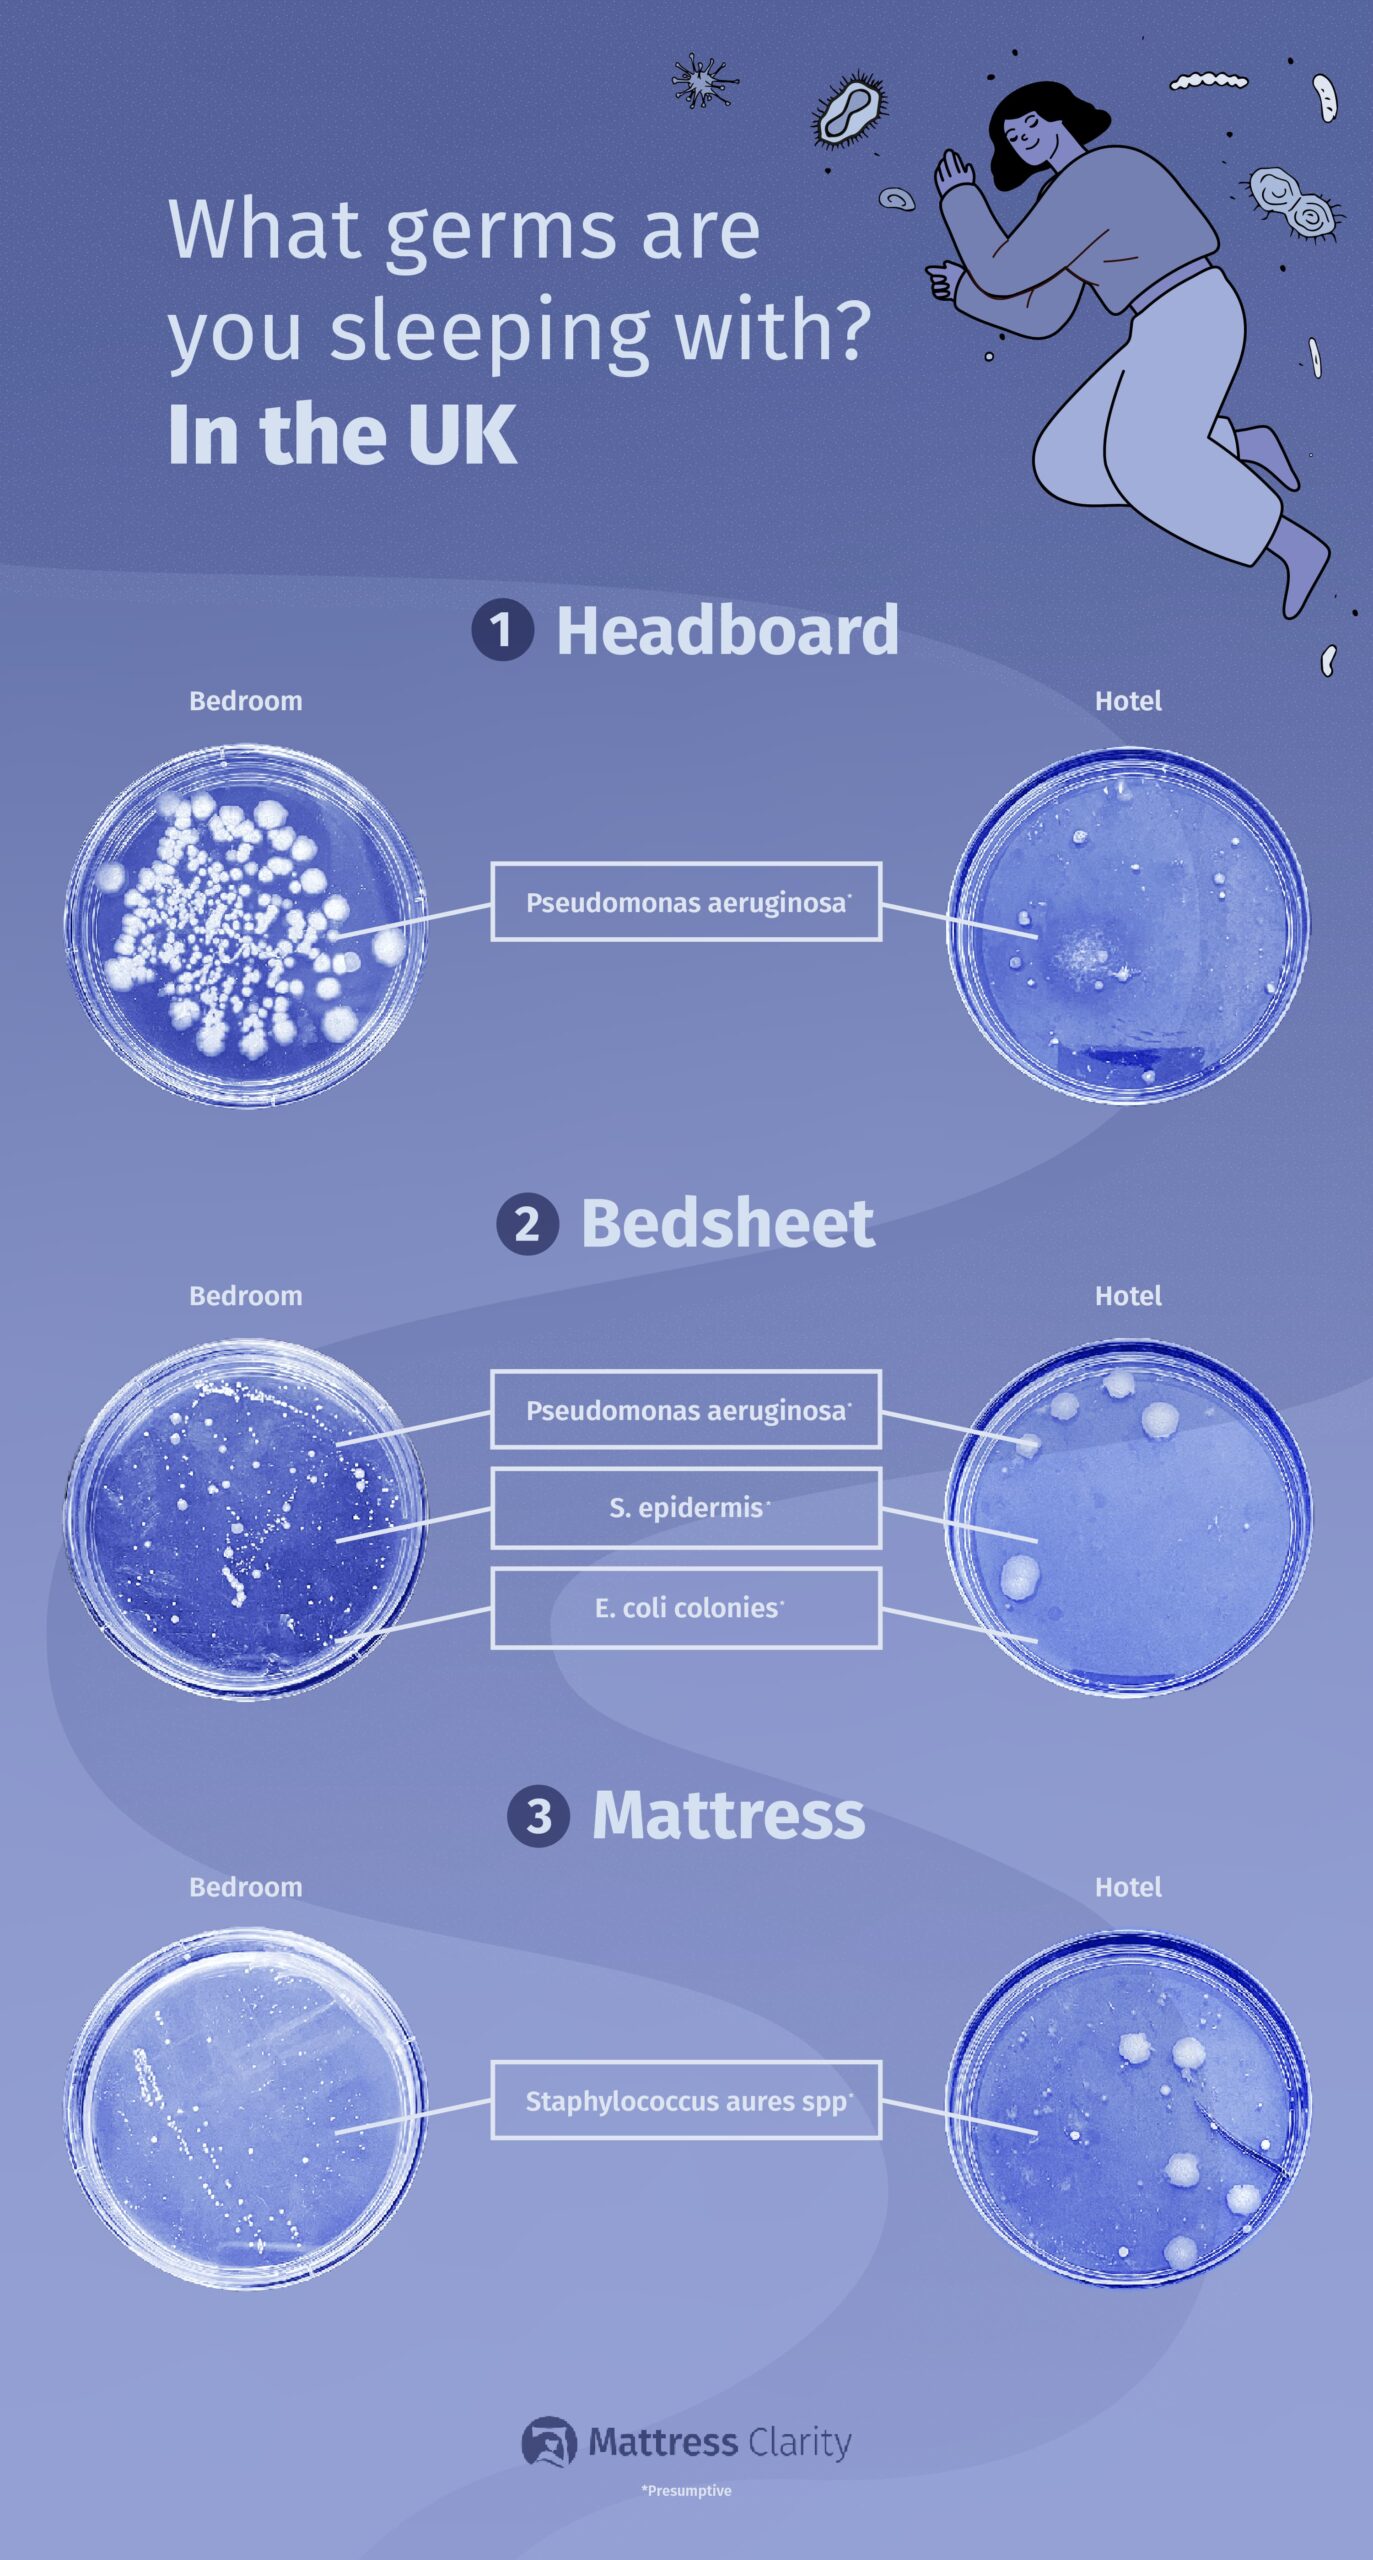 Image showing Petri dishes with bacteria on them that shows how dirty the UK sleeping spaces are.